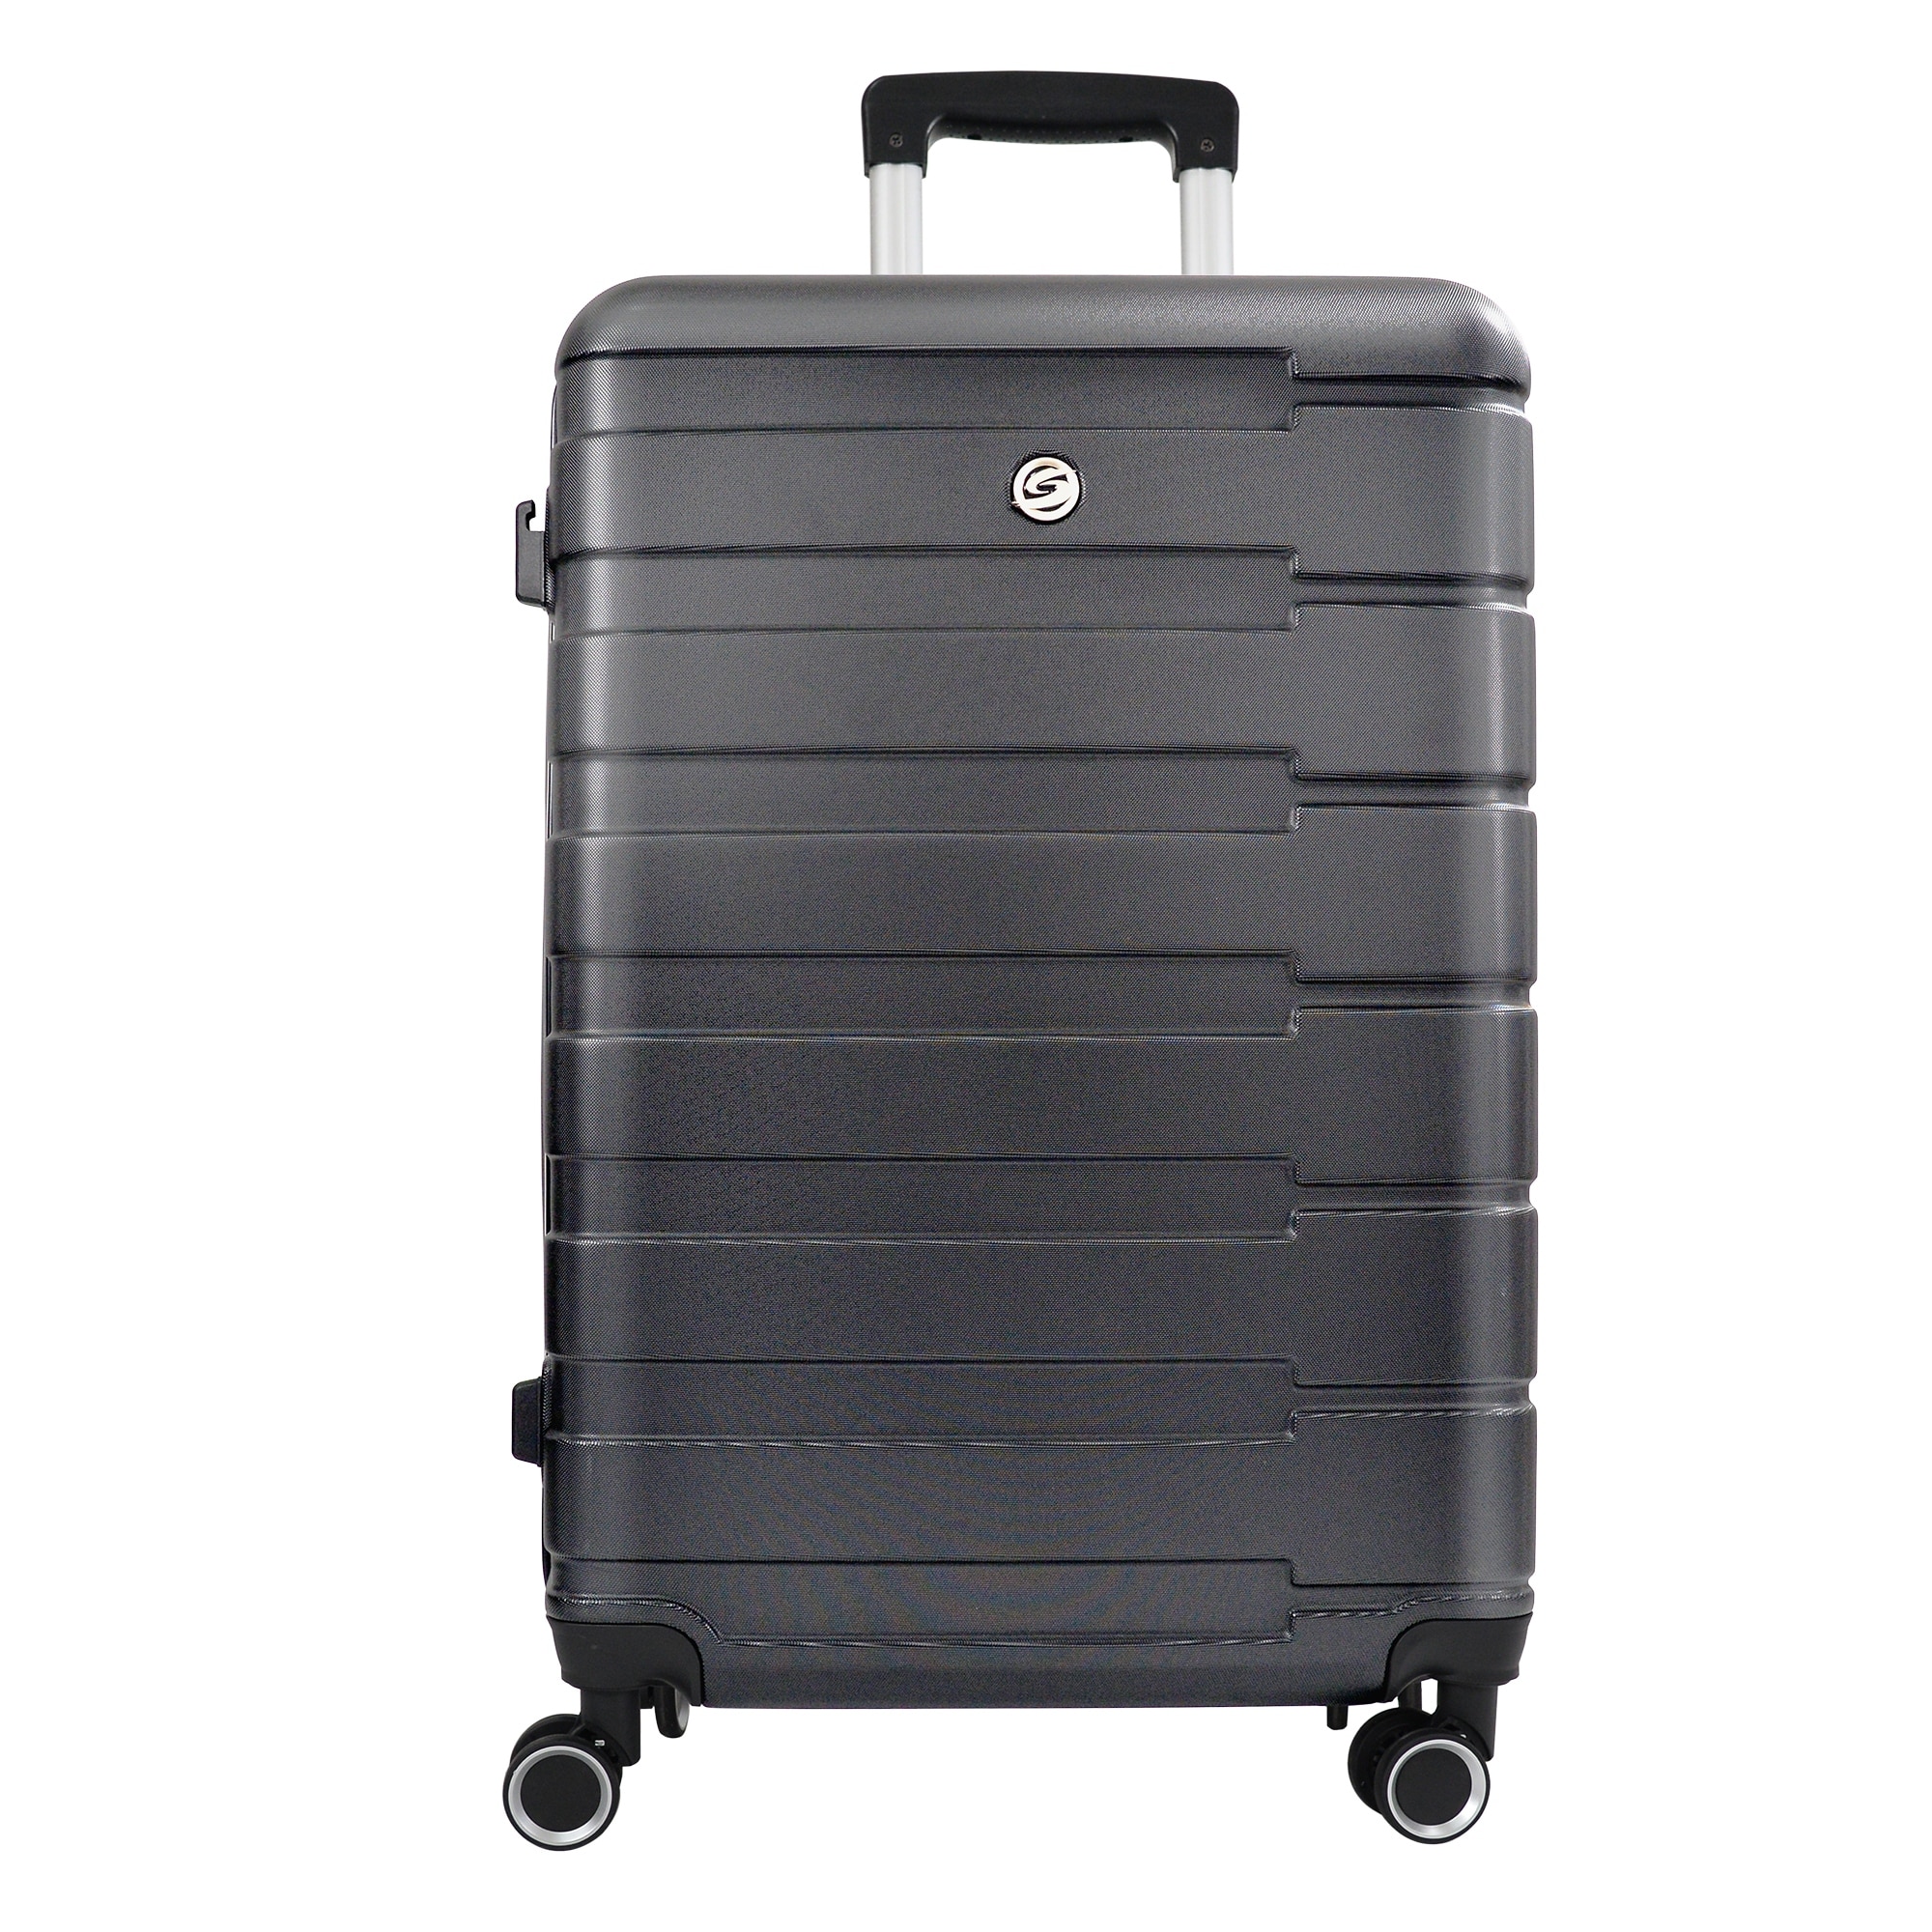 Hard Shell Suitcase Checked luggage, Large Suitcase with Spinner Wheels, Travel Luggage Suitcases with Lock,Carry On Luggage